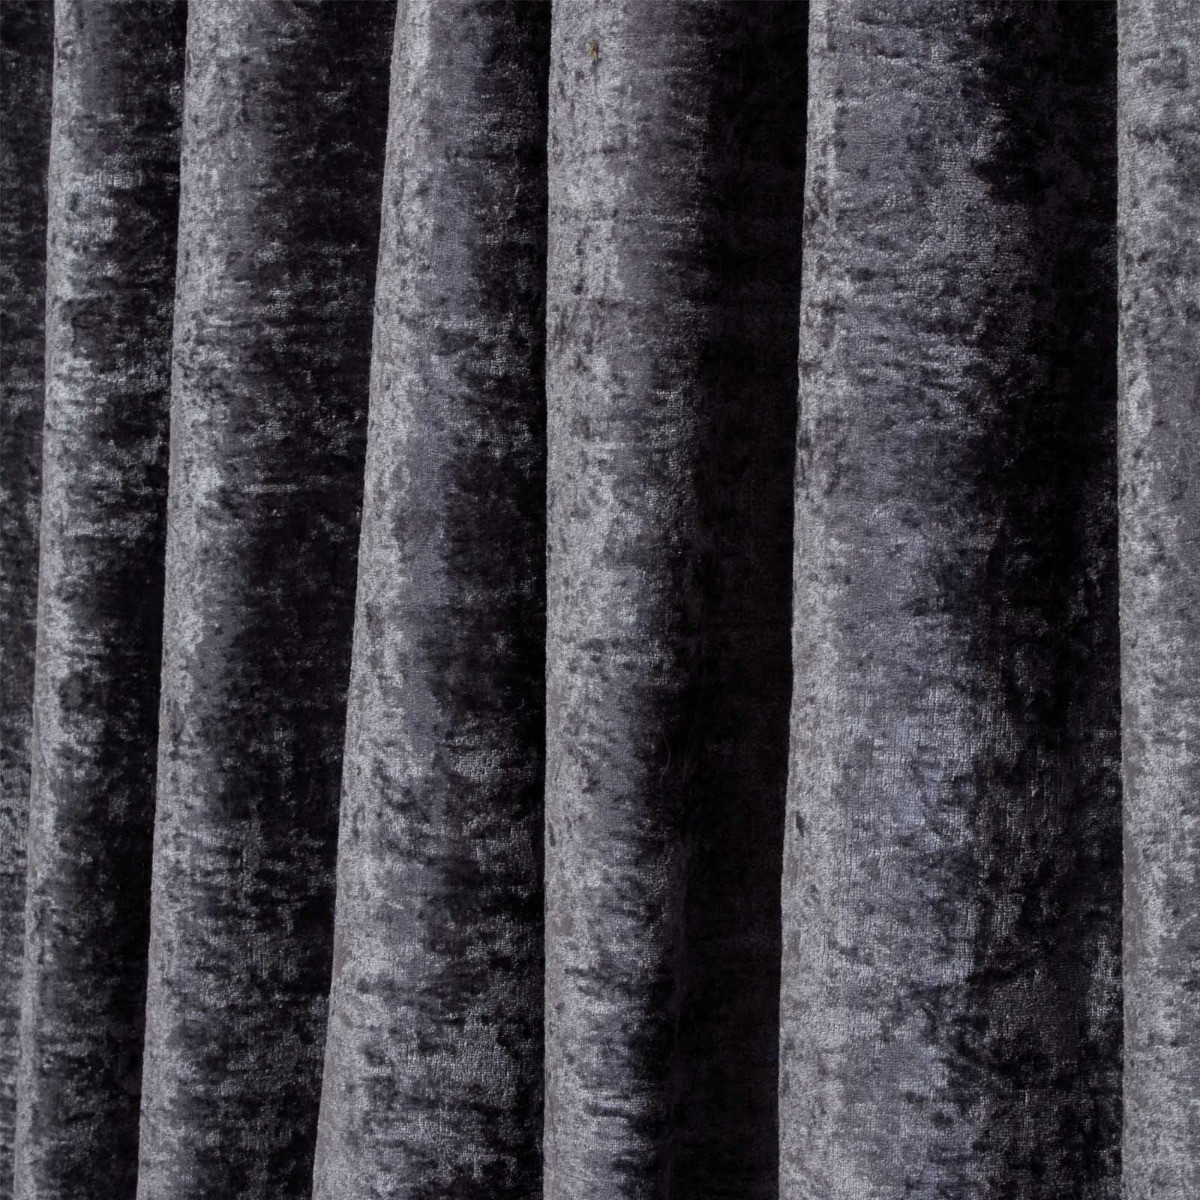 Sienna Crushed Velvet Pencil Pleat Curtains - Charcoal>